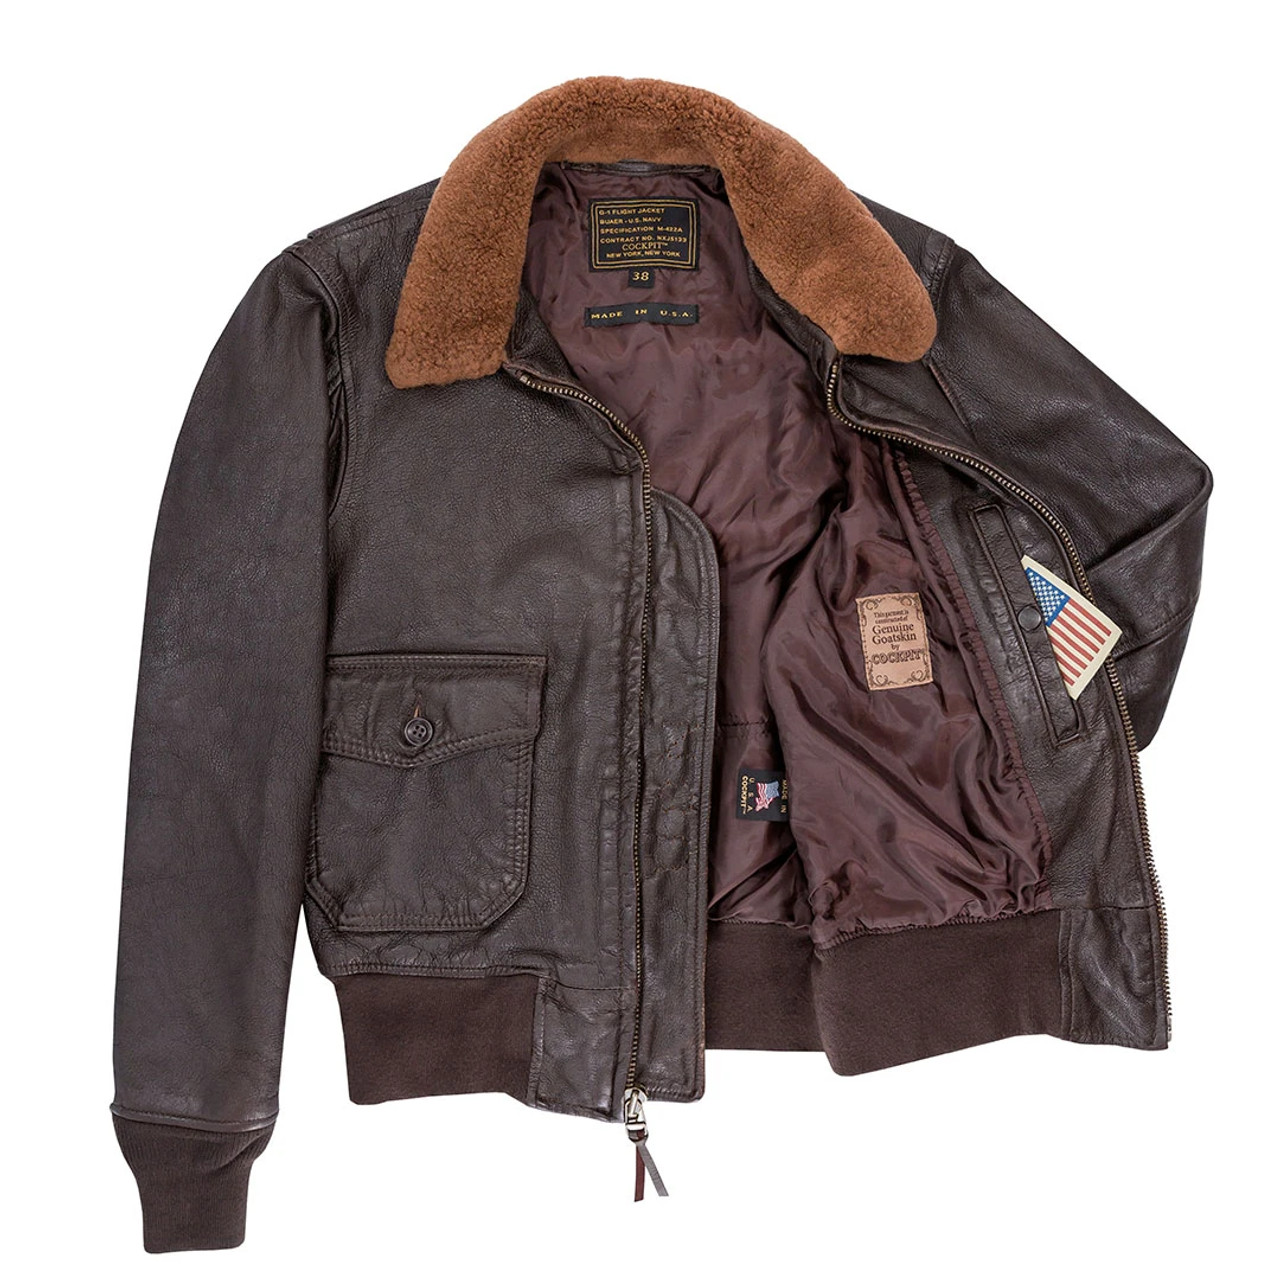 Cockpit USA Vintage G-1 Jacket without Patches Brown USA Made